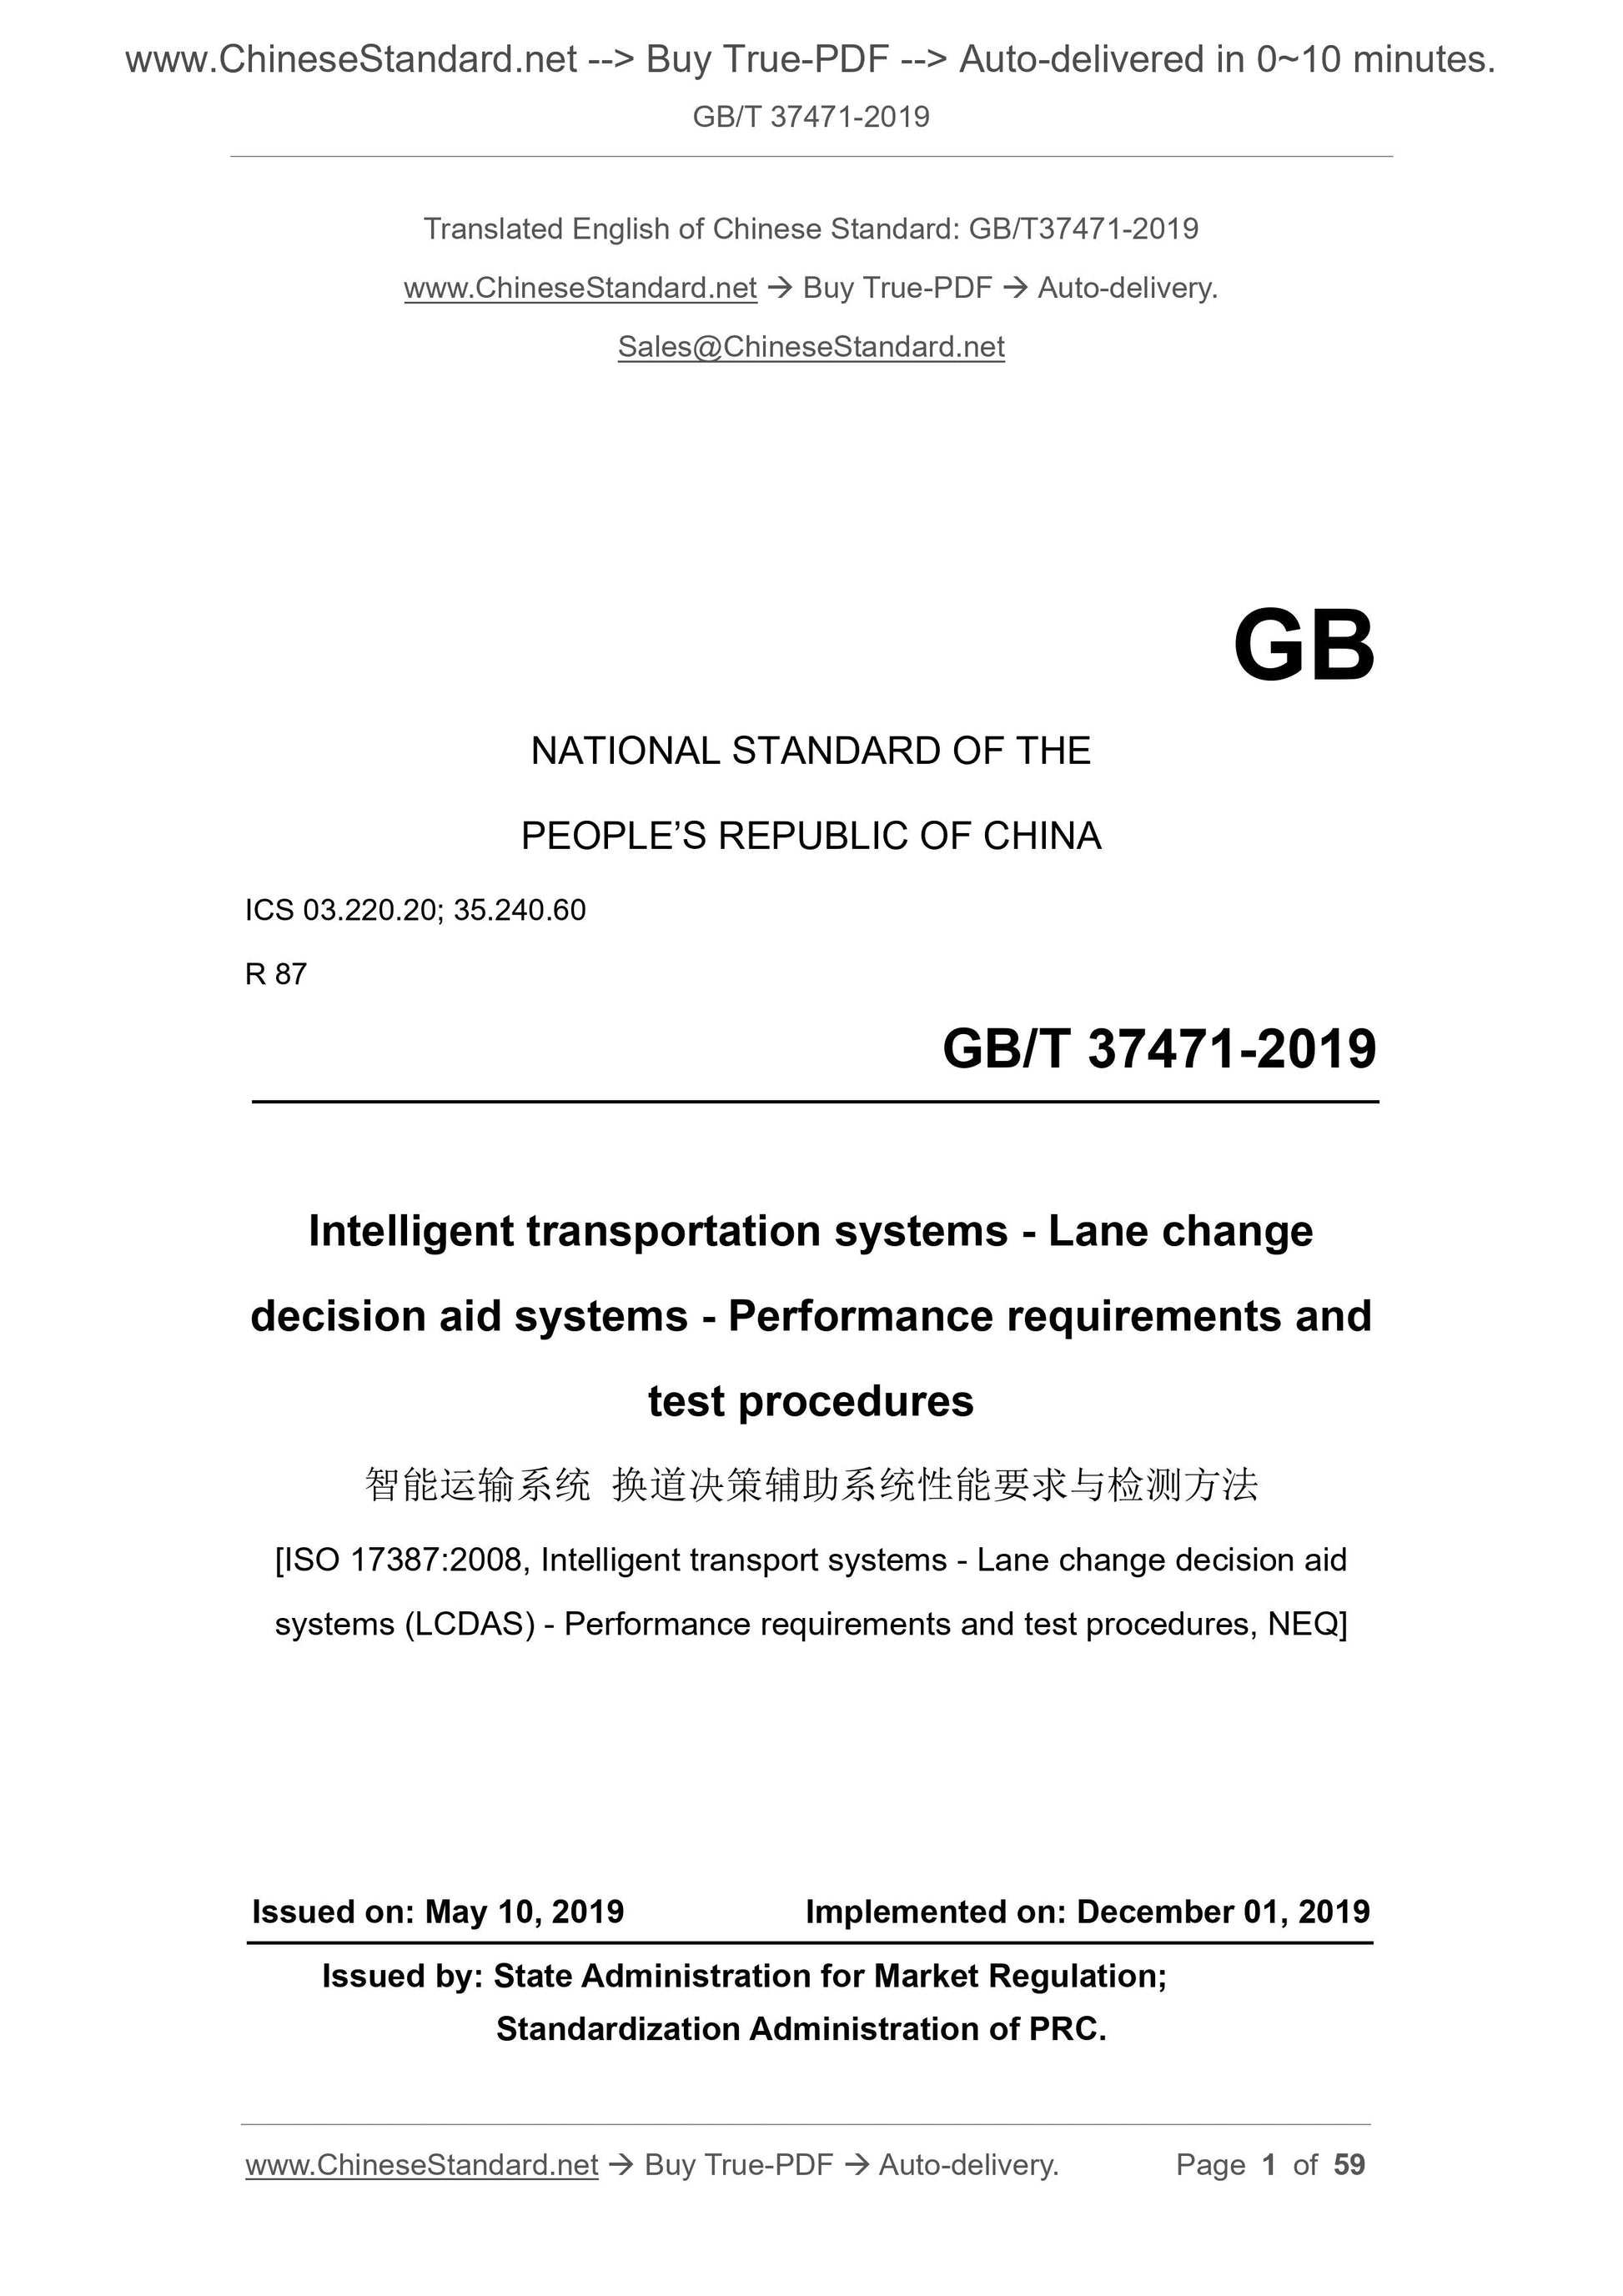 GB/T 37471-2019 Page 1